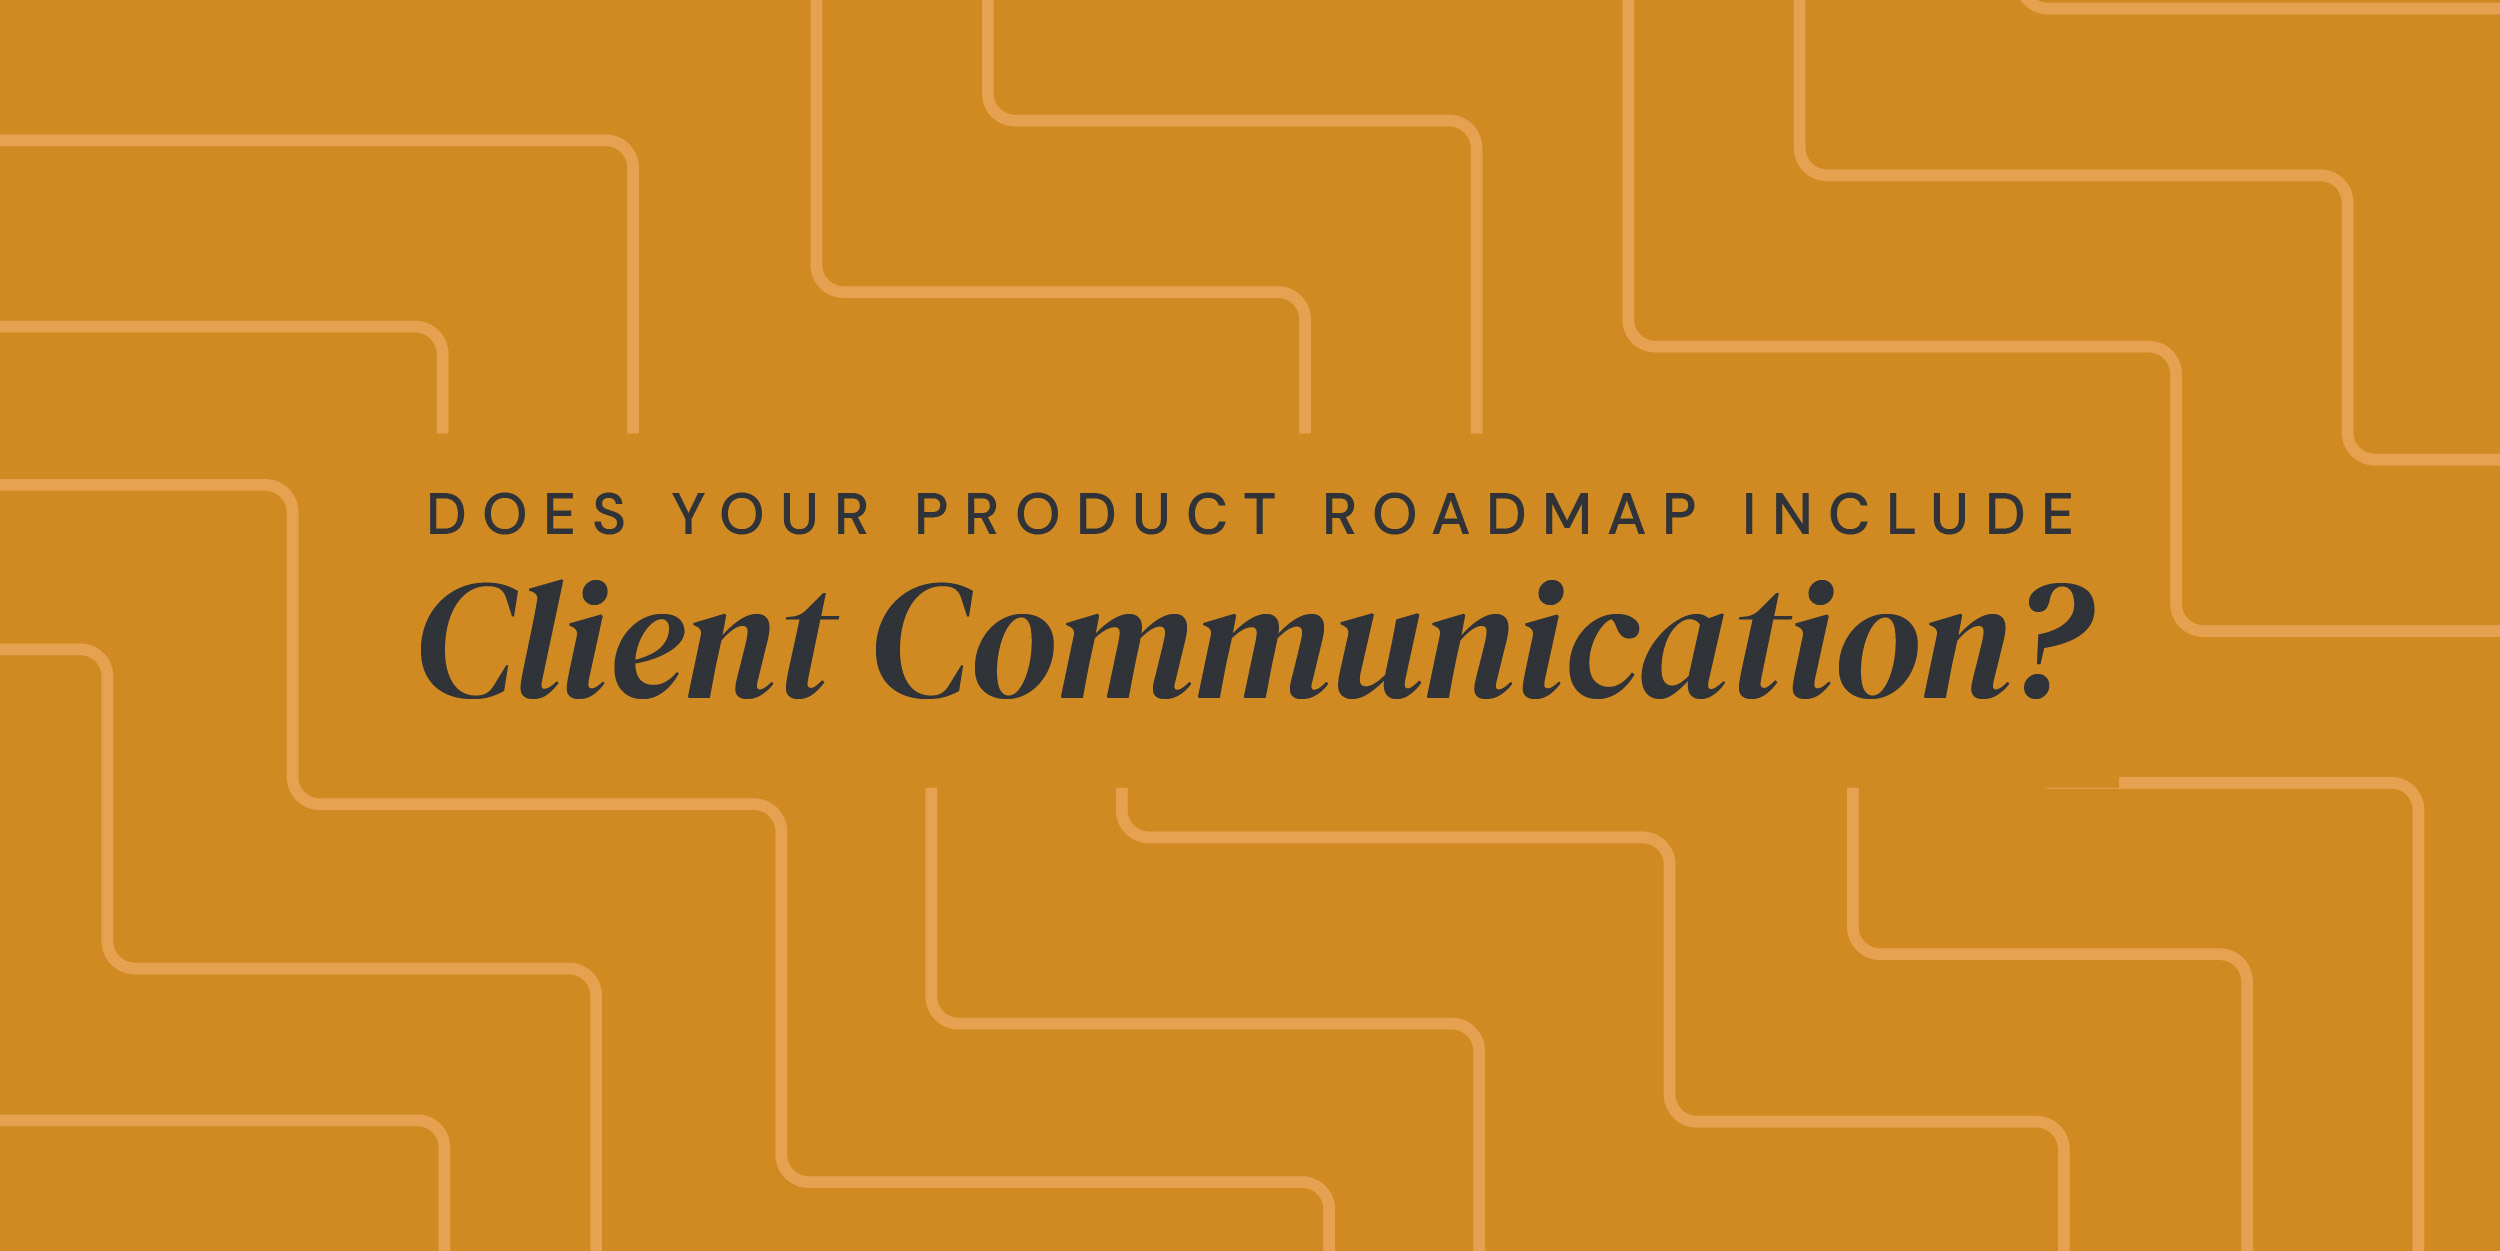 client communication for product roadmap